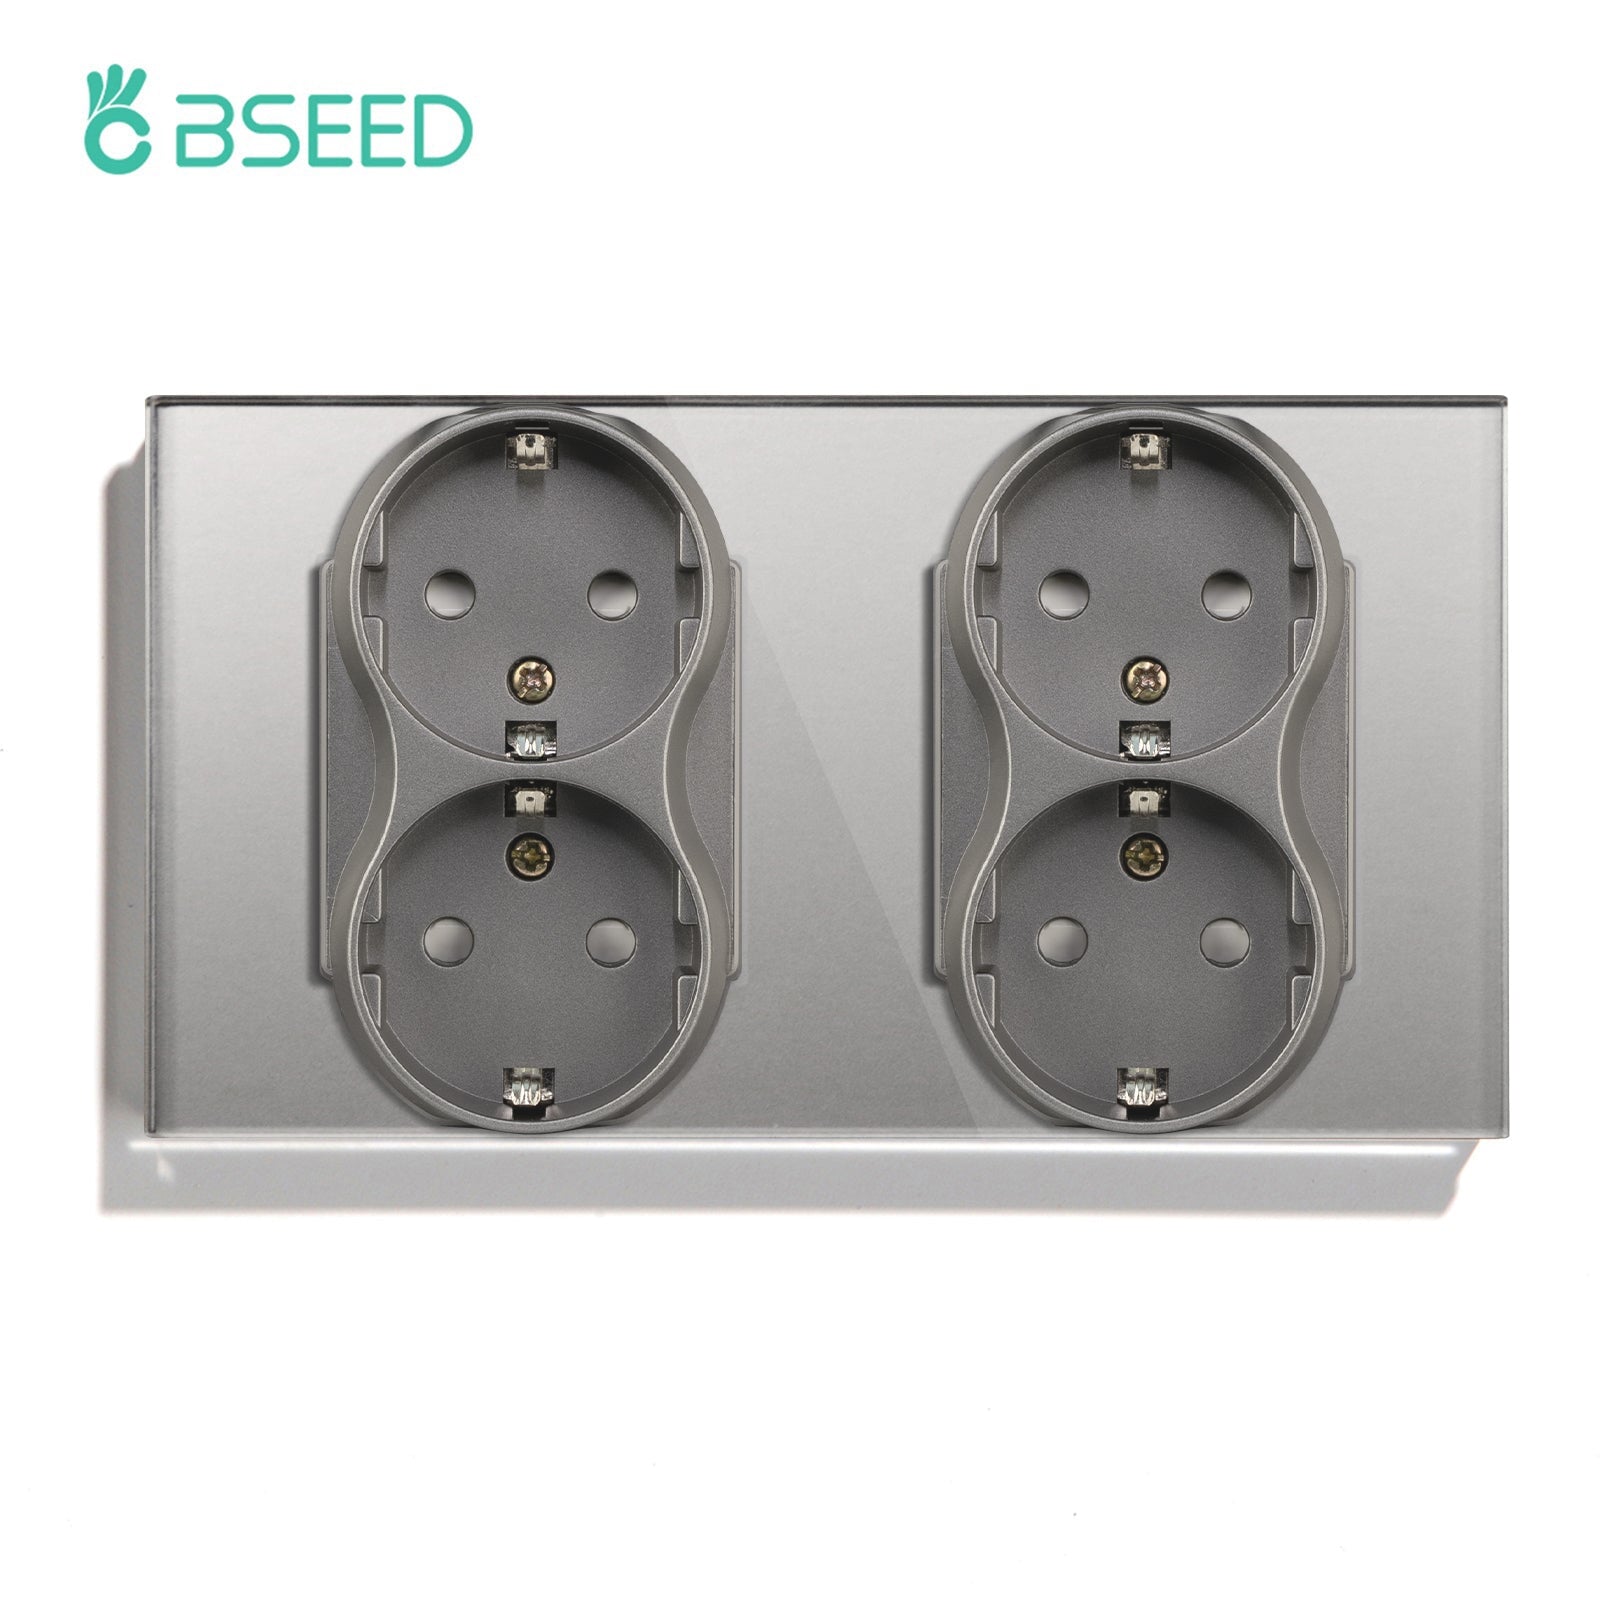 BSEED EU Double Sockets Power Wall Outlet Home Wall Power Sockets Glass Panel Power Outlets & Sockets Bseedswitch Grey Double 